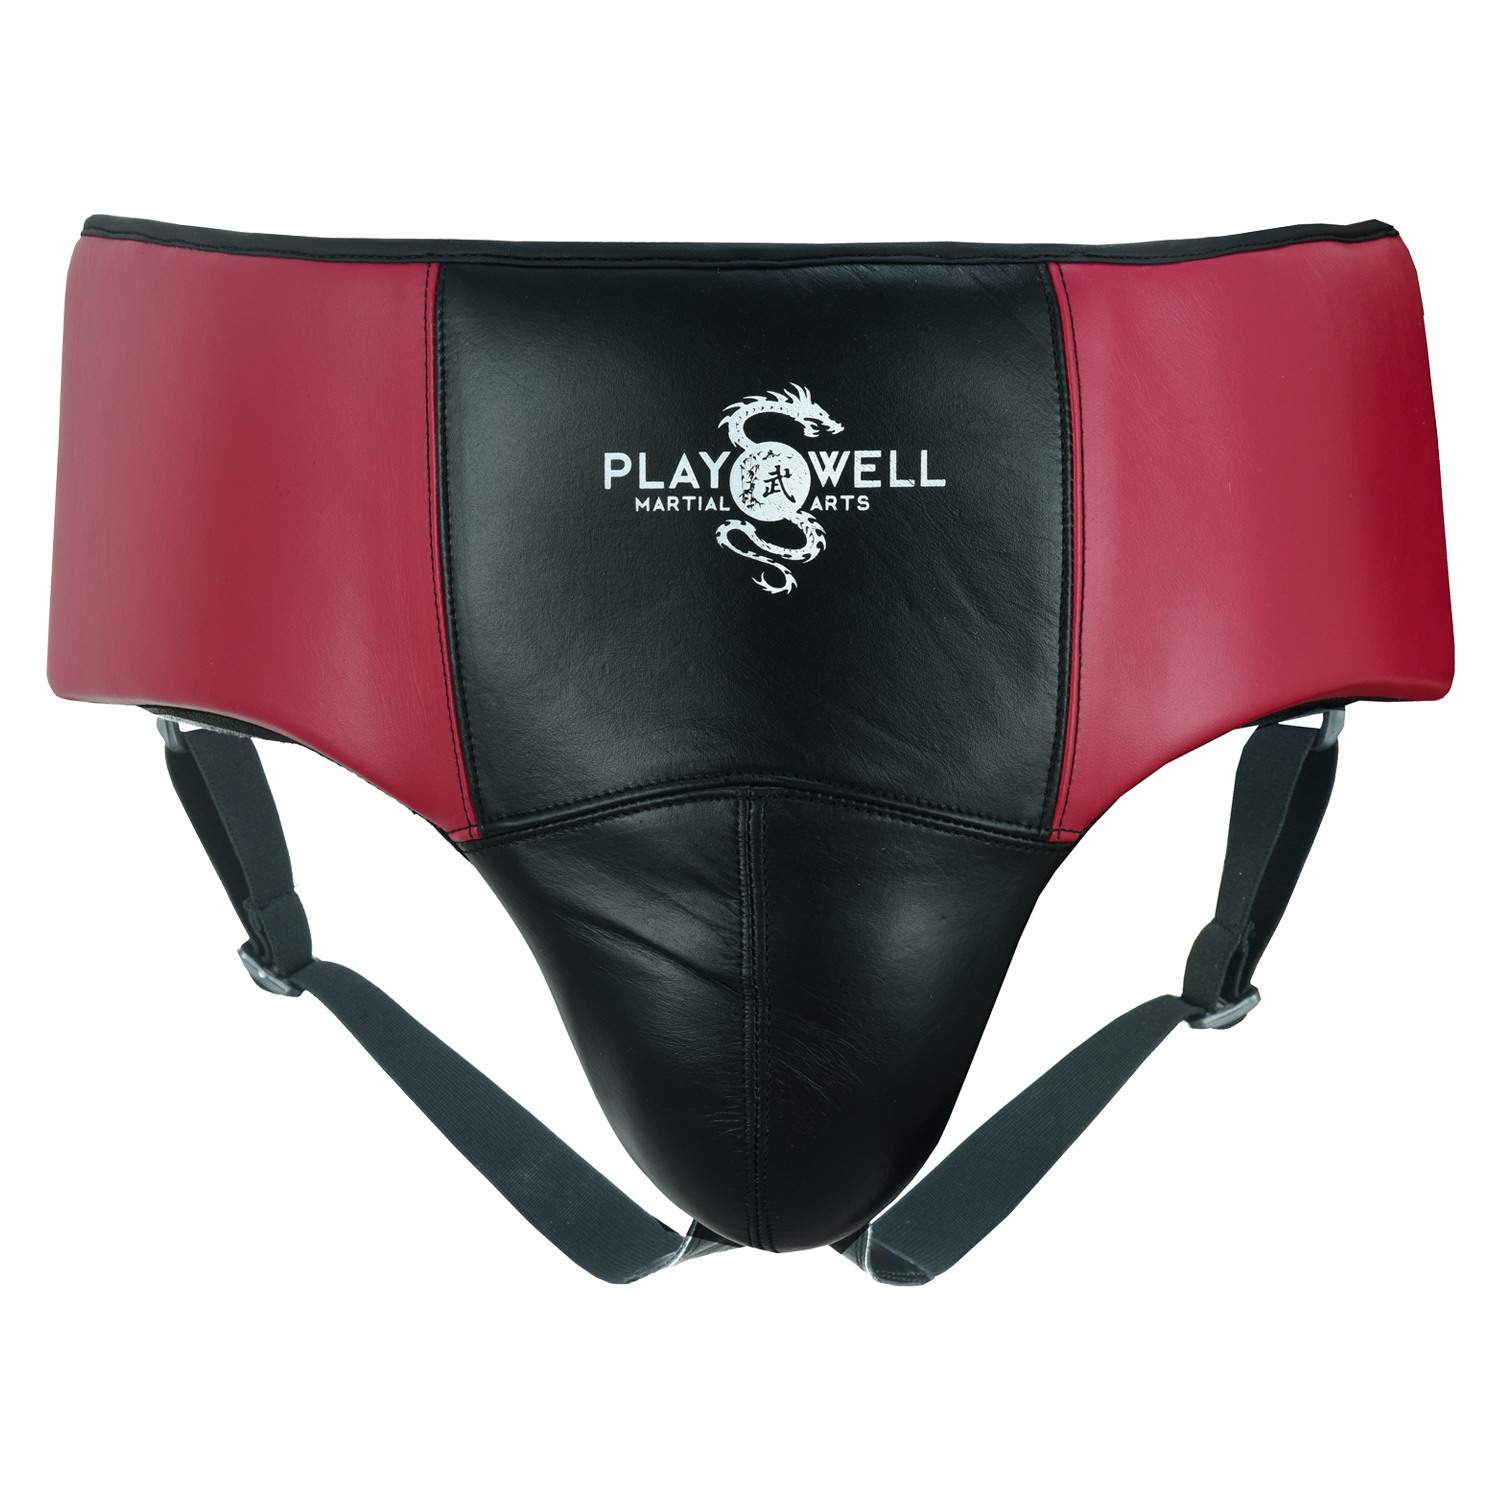 Playwell Boxing Leather Groin Guard - Black/Maroon - Click Image to Close